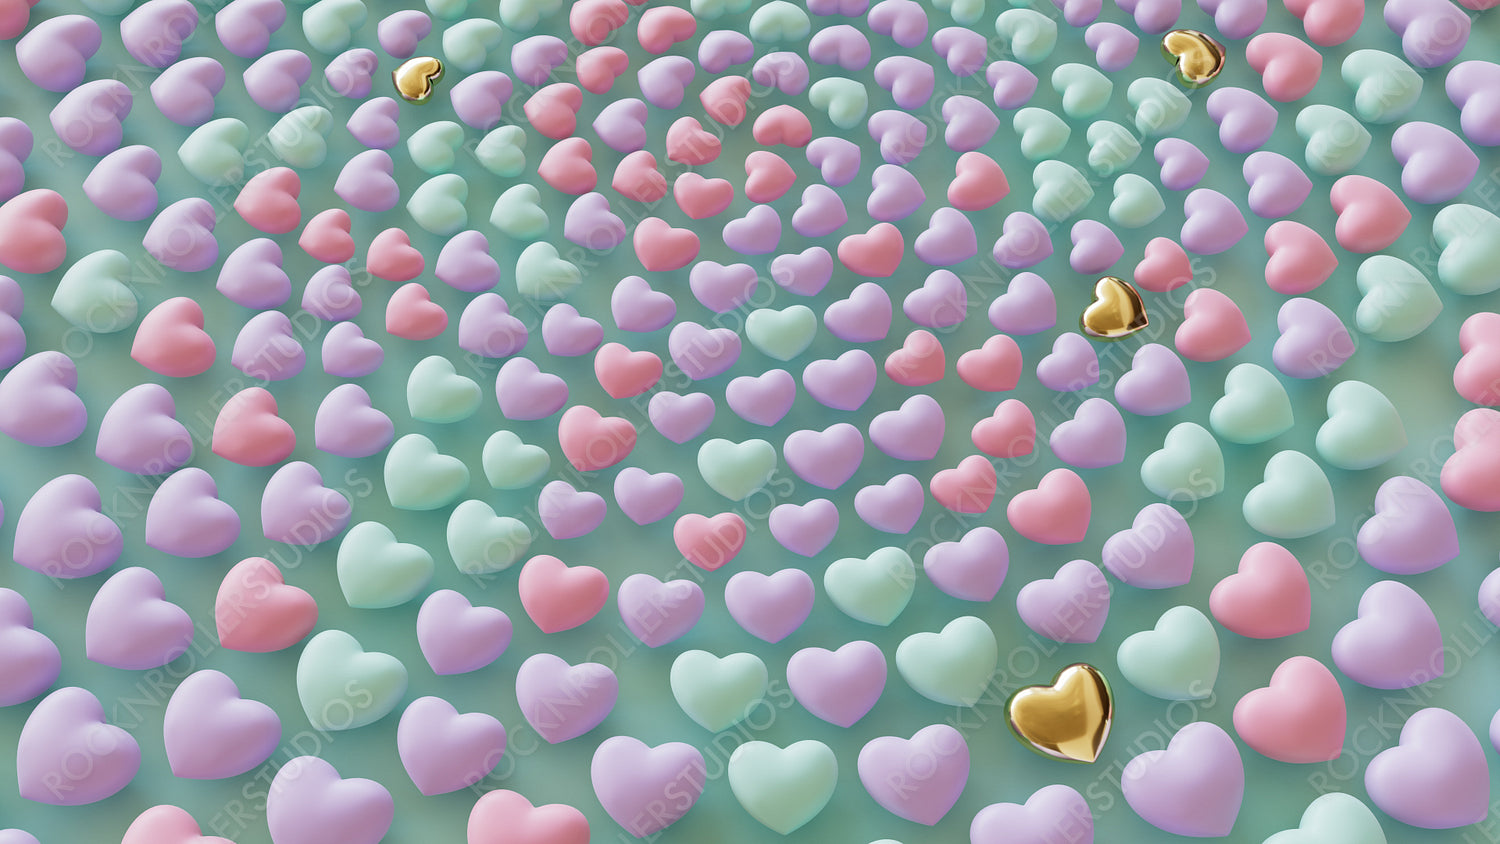 Pastel colored 3D Hearts arranged in the Shape of a Spiral. Contemporary Valentine's Day Background. 3D Render.